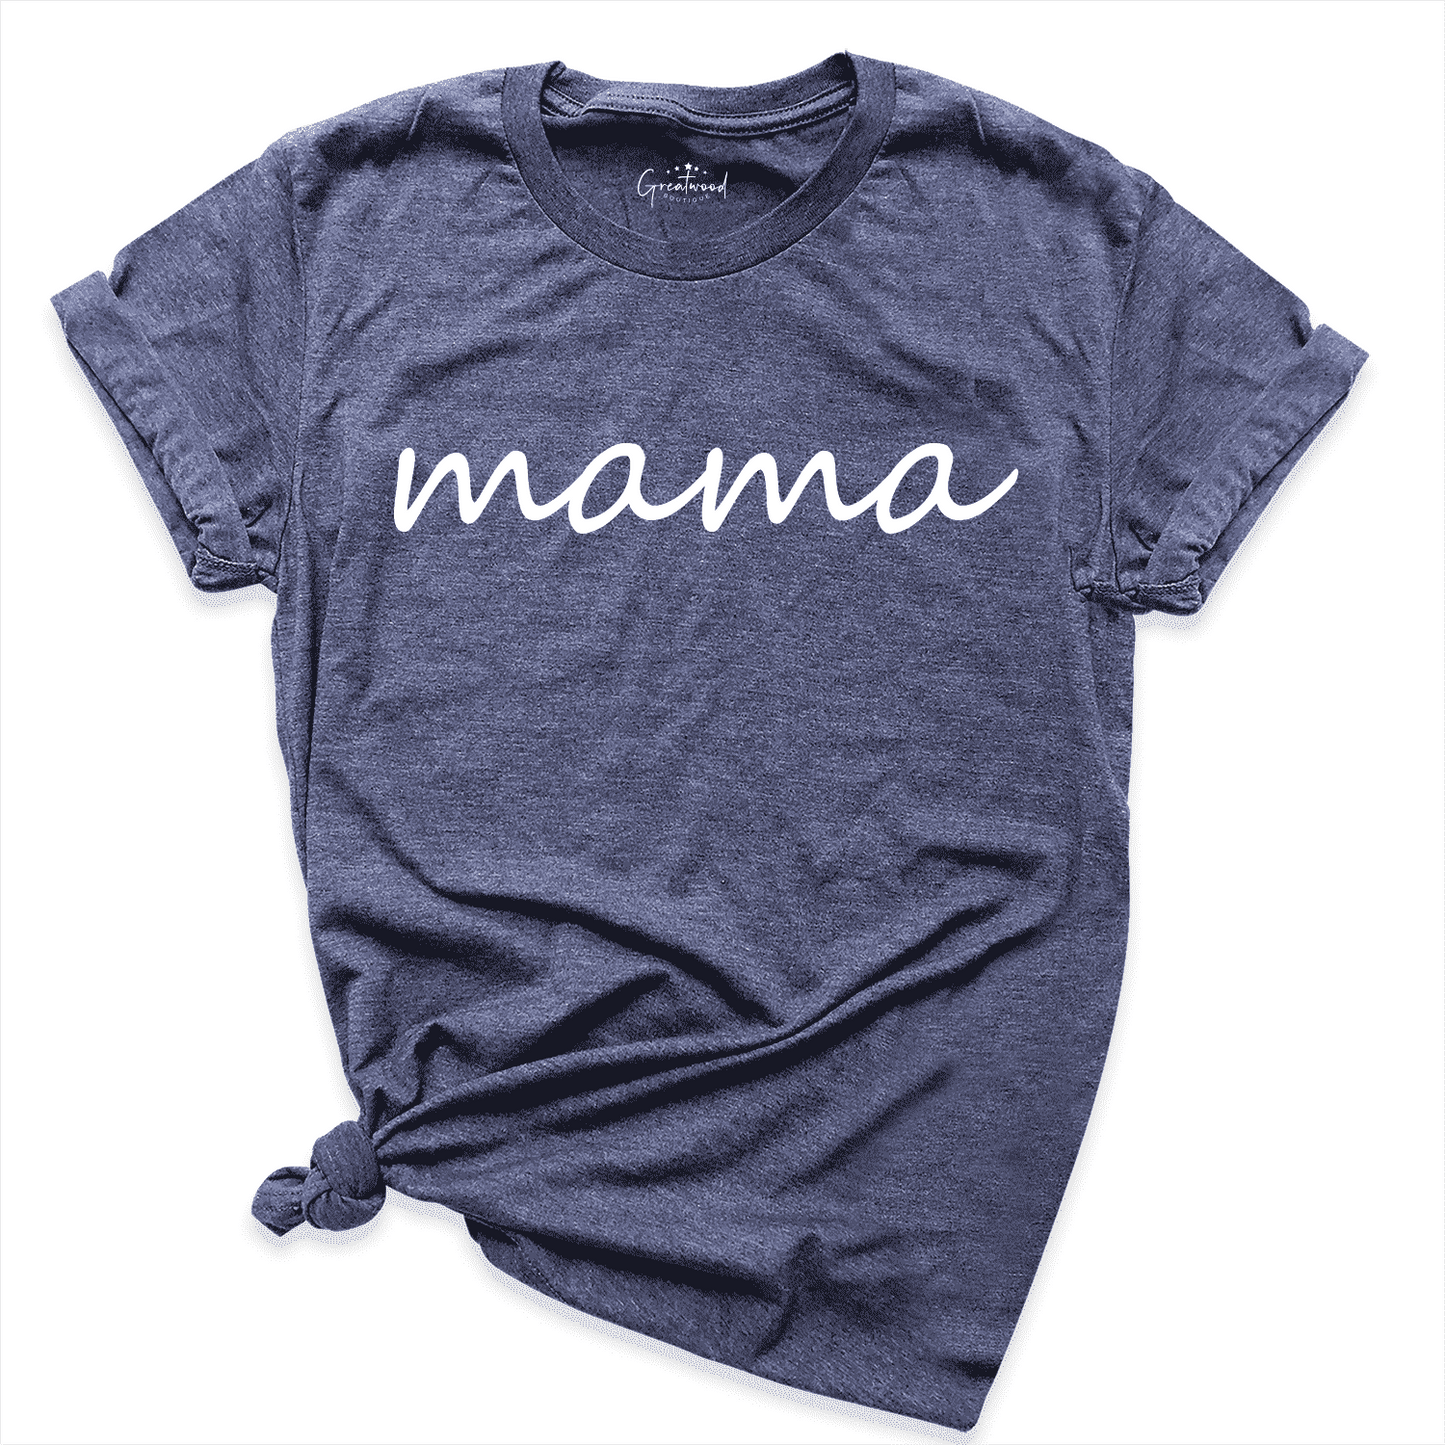 New Mama Shirt Navy - Greatwood Boutique